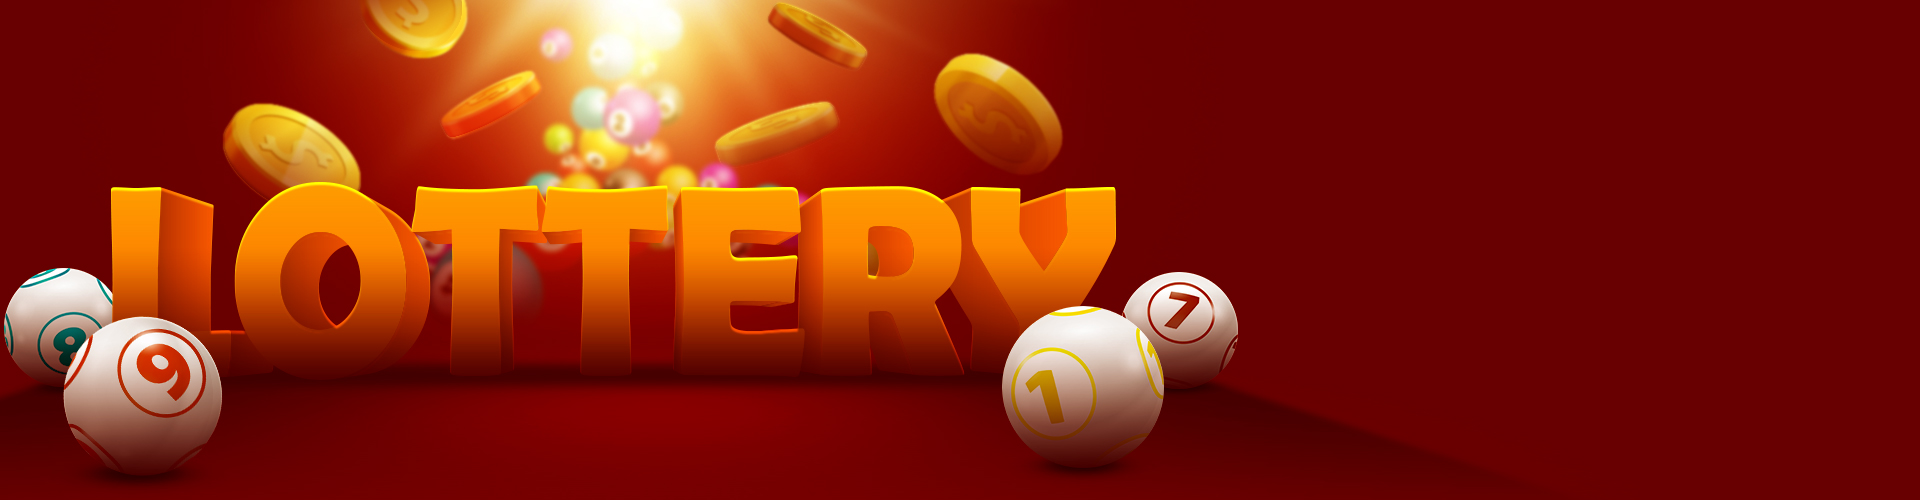 Lottery Promotion General Terms & Conditions